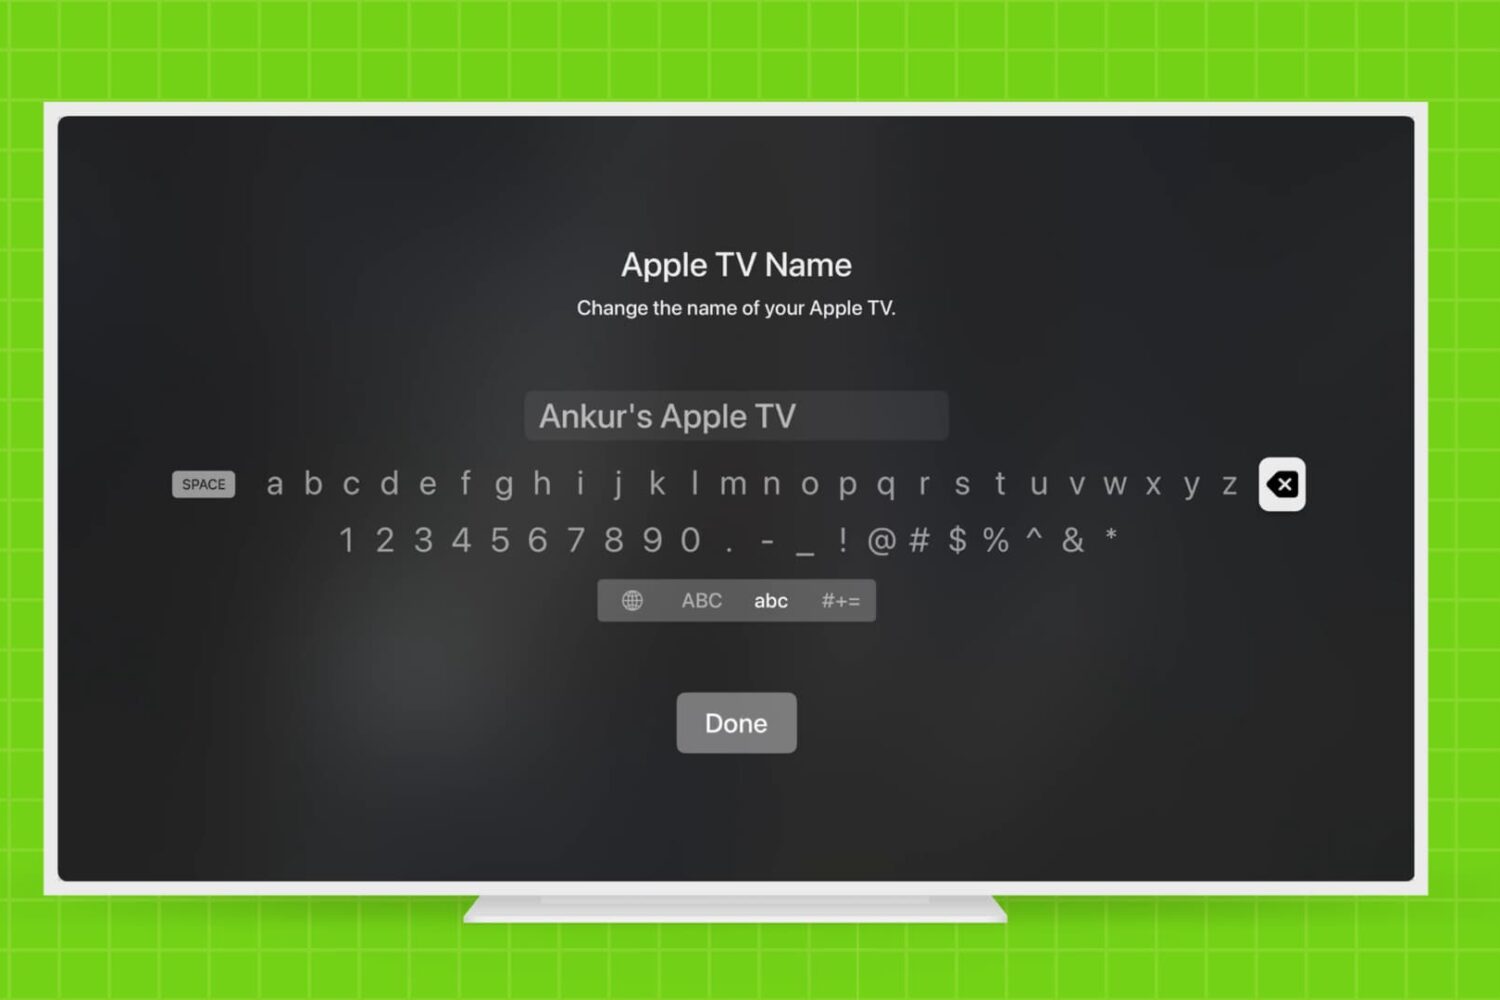 Changing the name of Apple TV